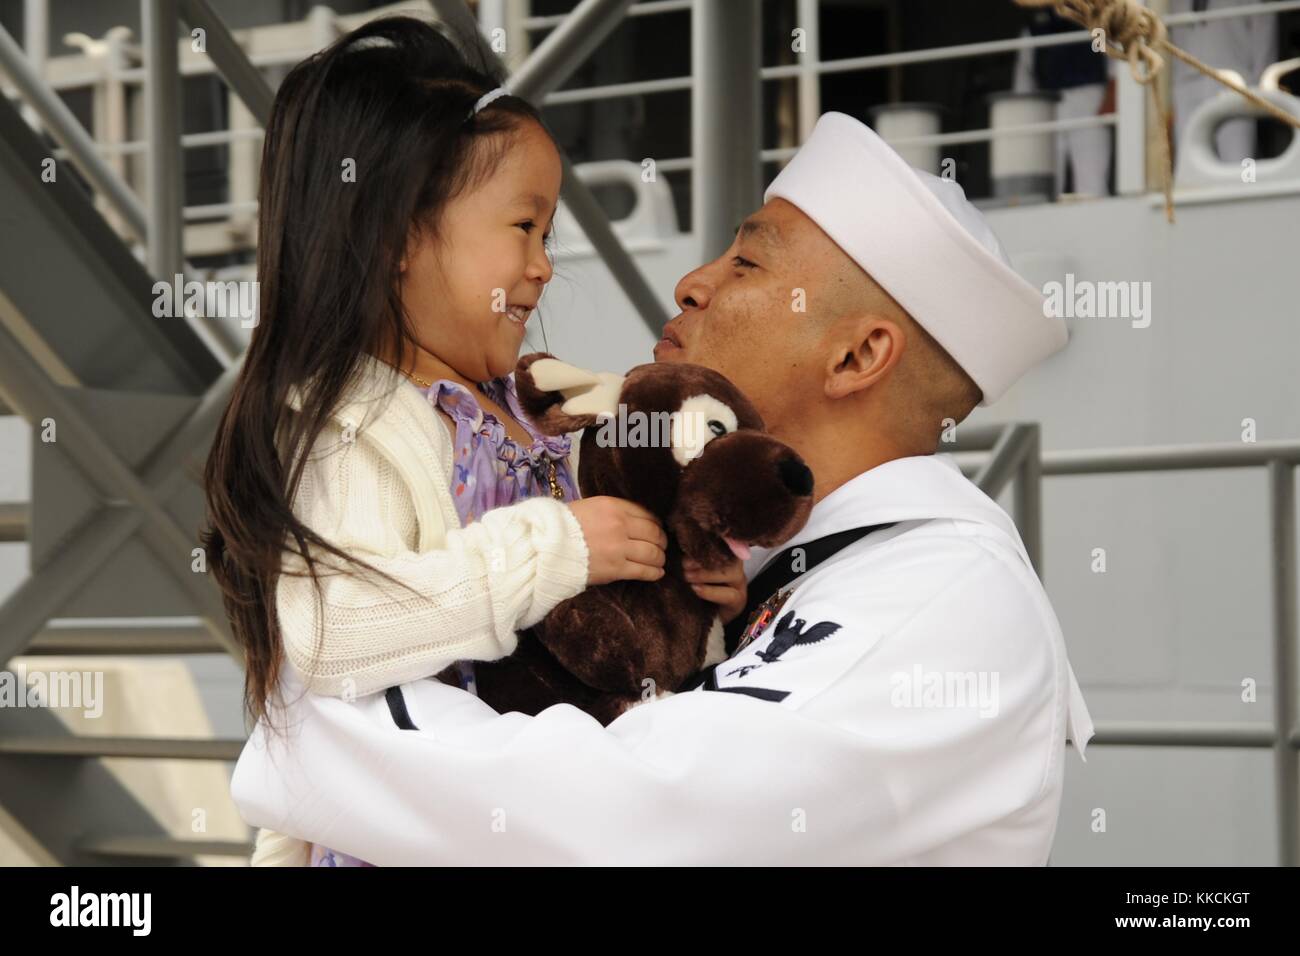 Logistics Specialist 2nd Class Roel Lunod, assigned to the Ticonderoga-class guided-missile cruiser USS Bunker Hill CG 52, receives the first hug from his daughter during a homecoming celebration at Naval Base San Diego. Image courtesy Mass Communication Specialist 2nd Class Rosalie Garcia/US Navy, 2012. Stock Photo